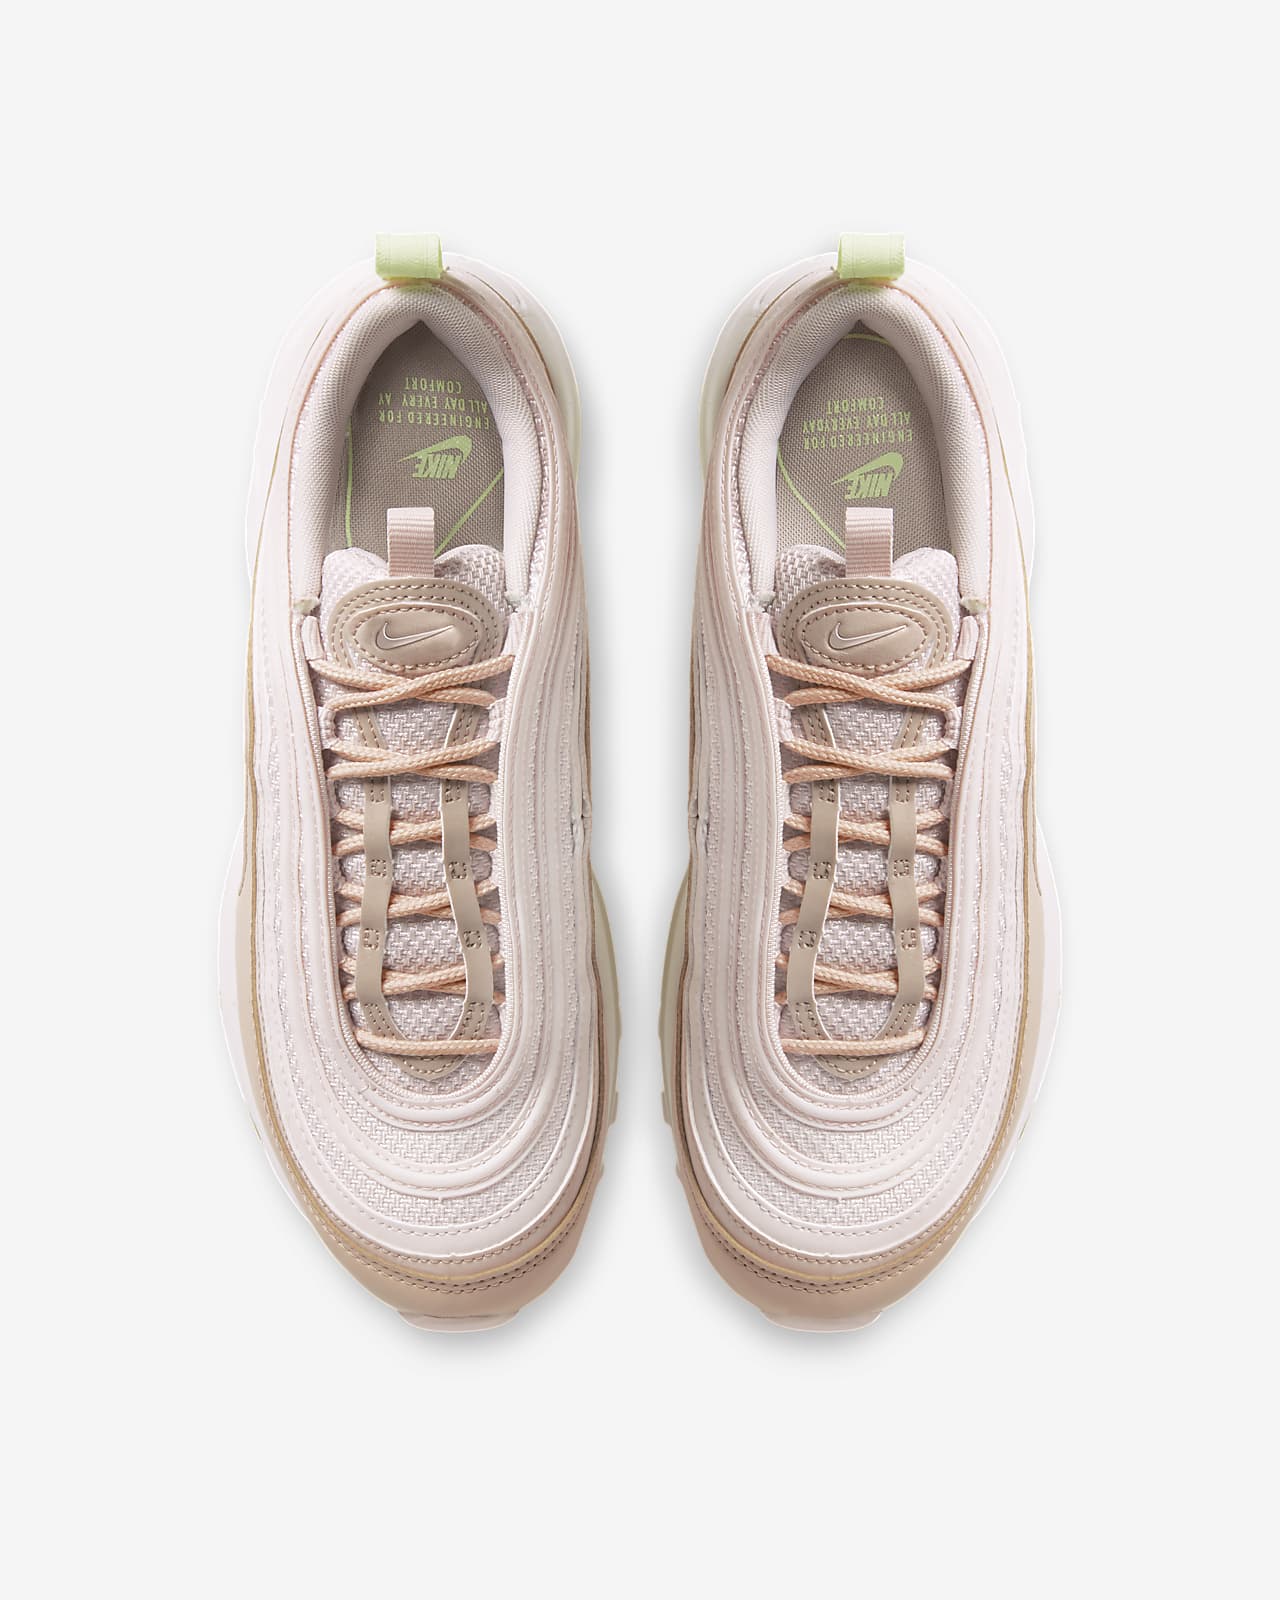 nike air max 97 womens barely rose Off 76%